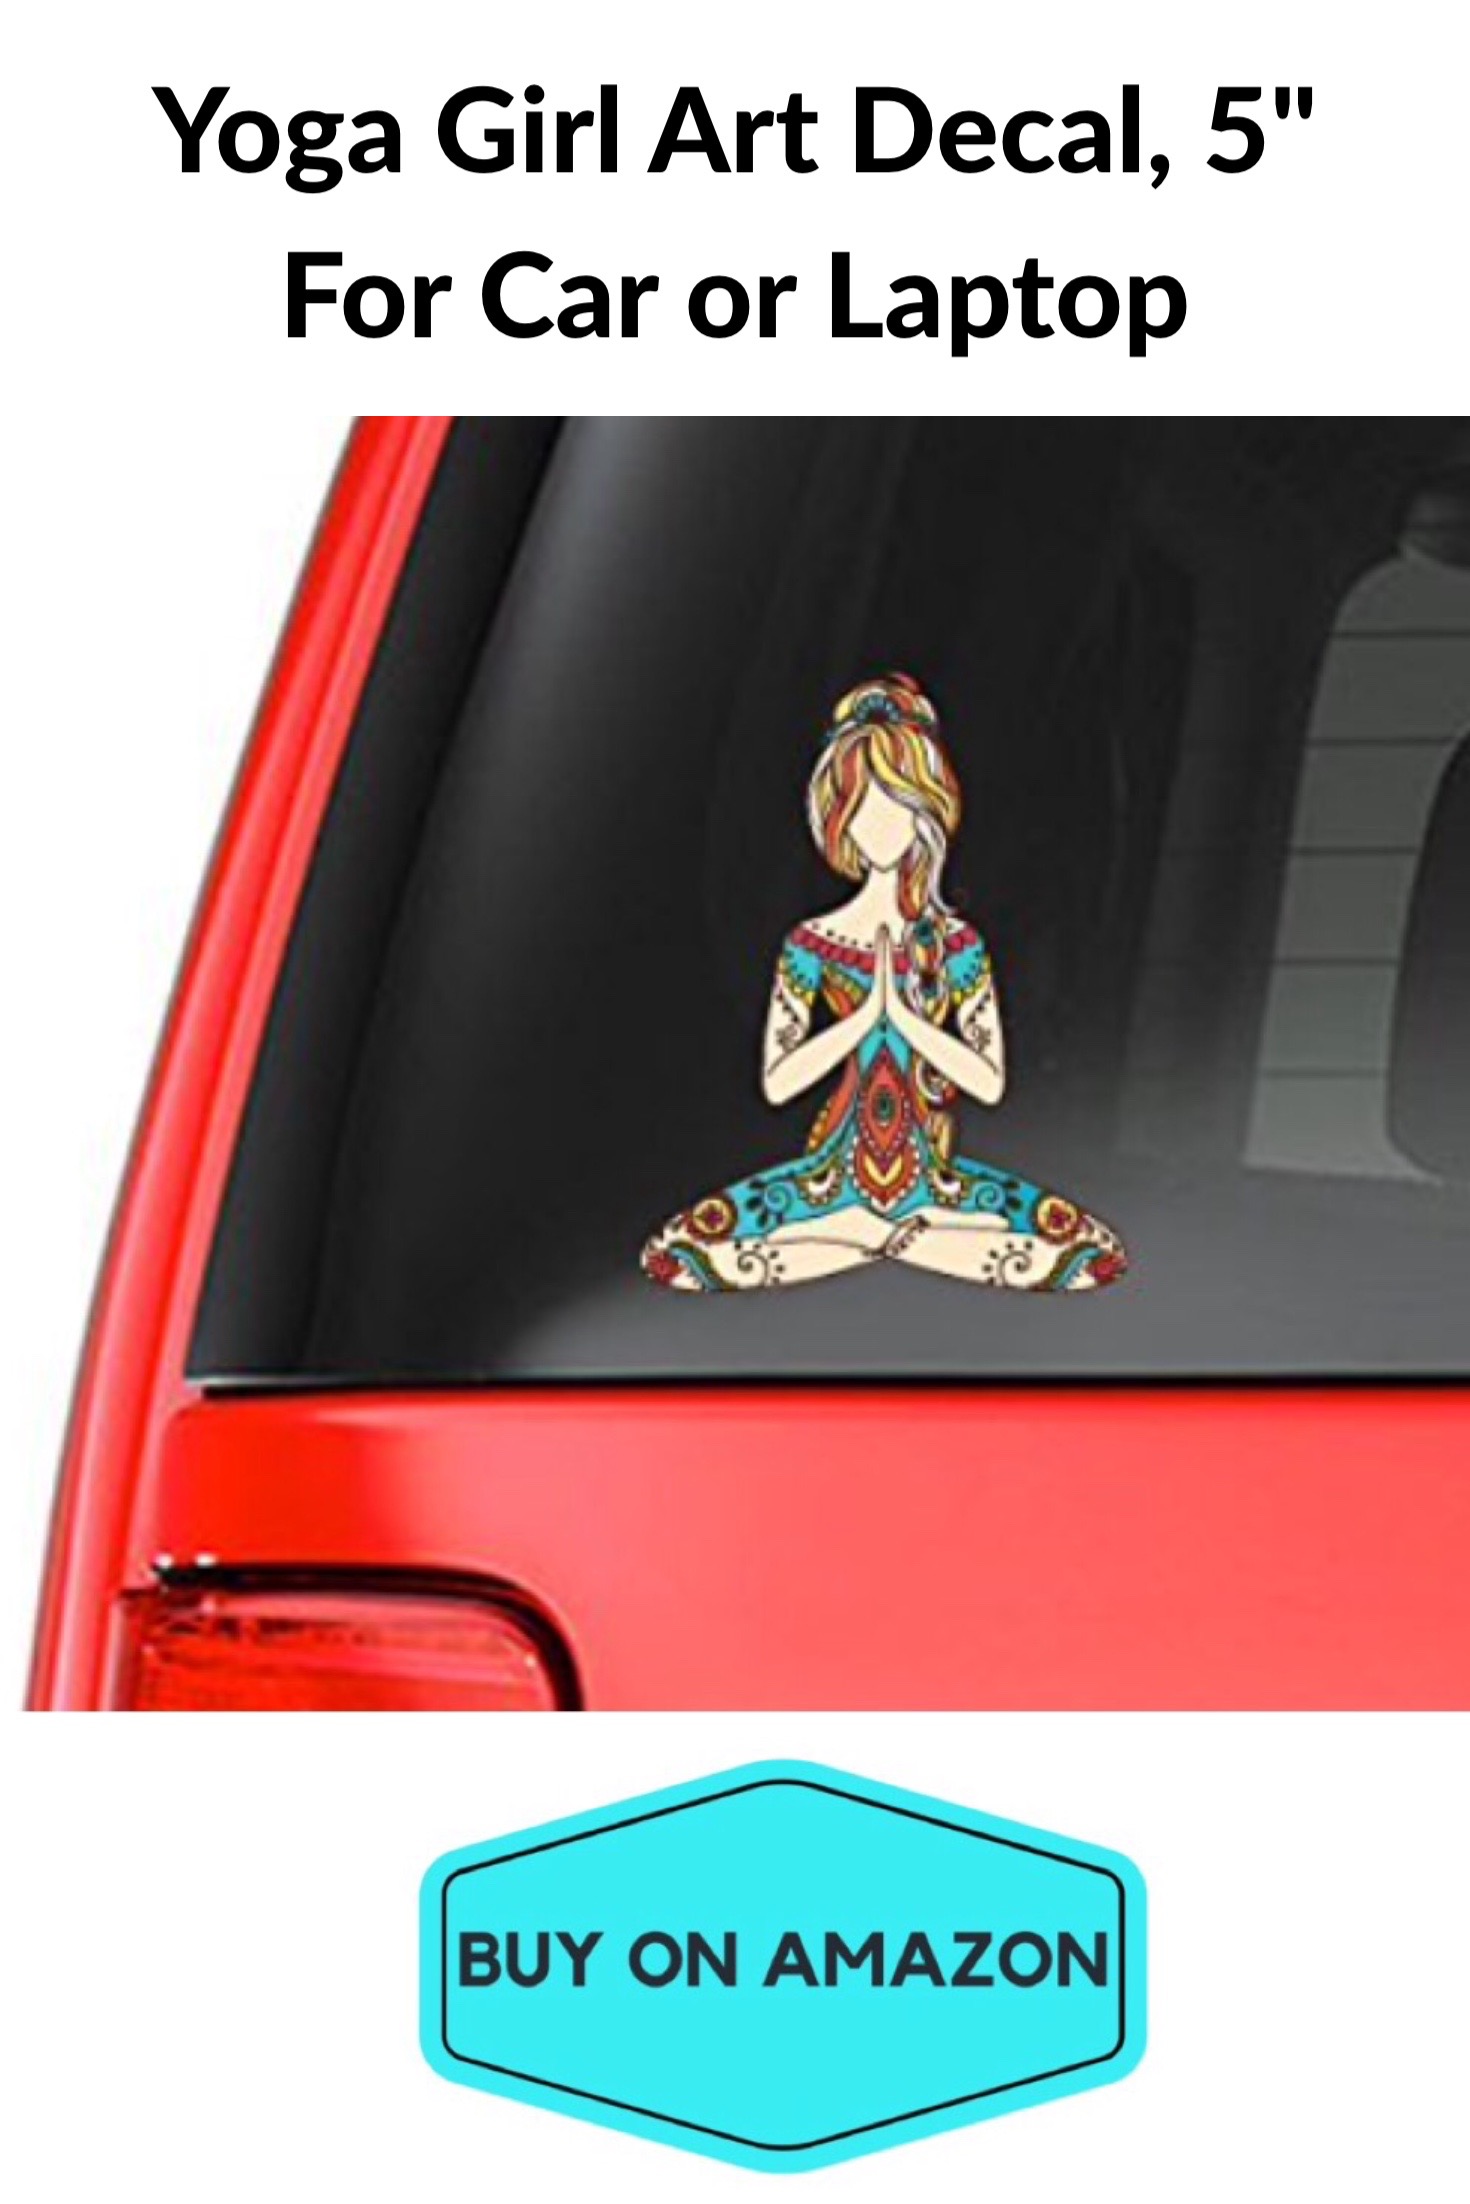 Yoga Girl Art Decal 5" For Car or Laptop